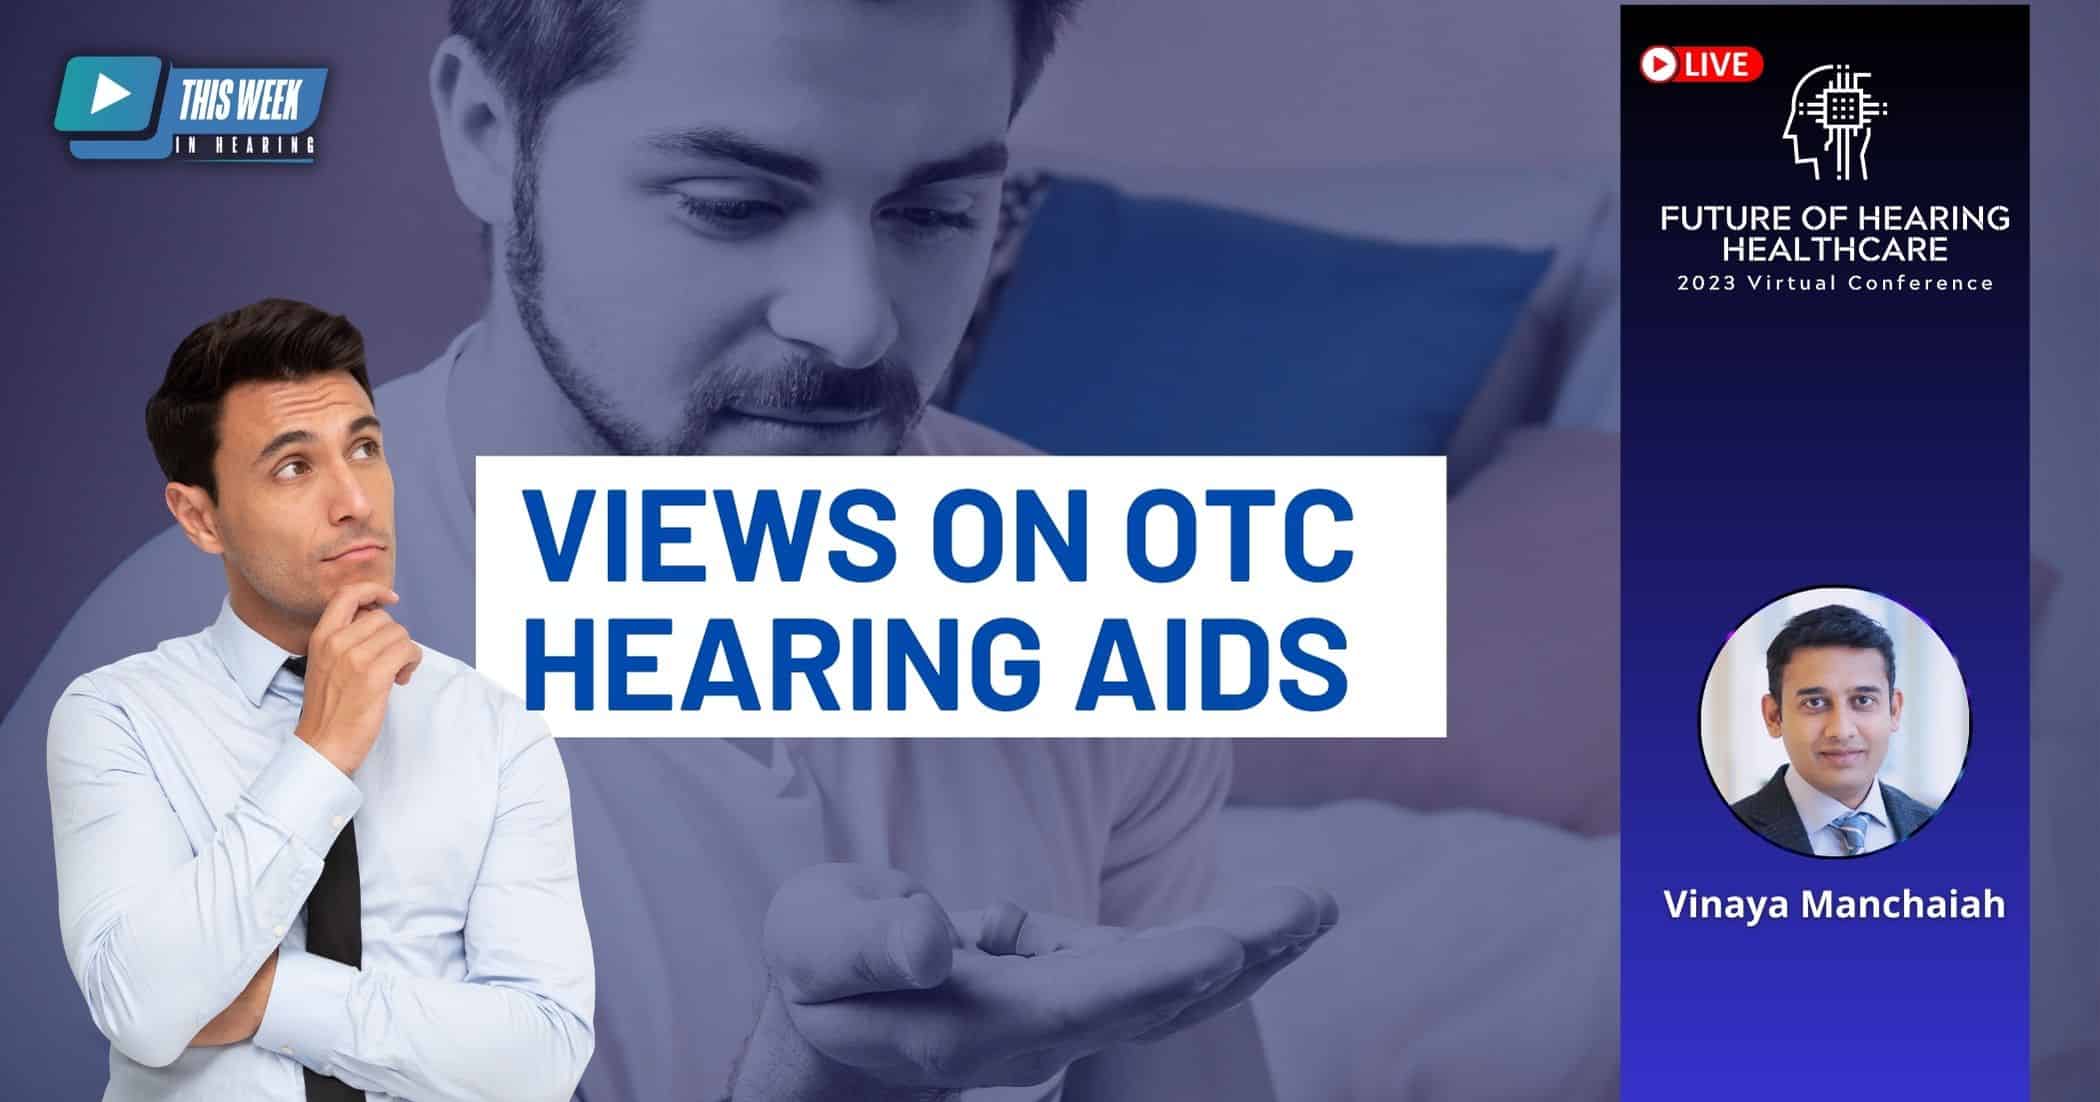 Featured image for “Hearing Professionals and Consumers Views on OTC Hearing Aids with Vinaya Manchaiah, PhD”